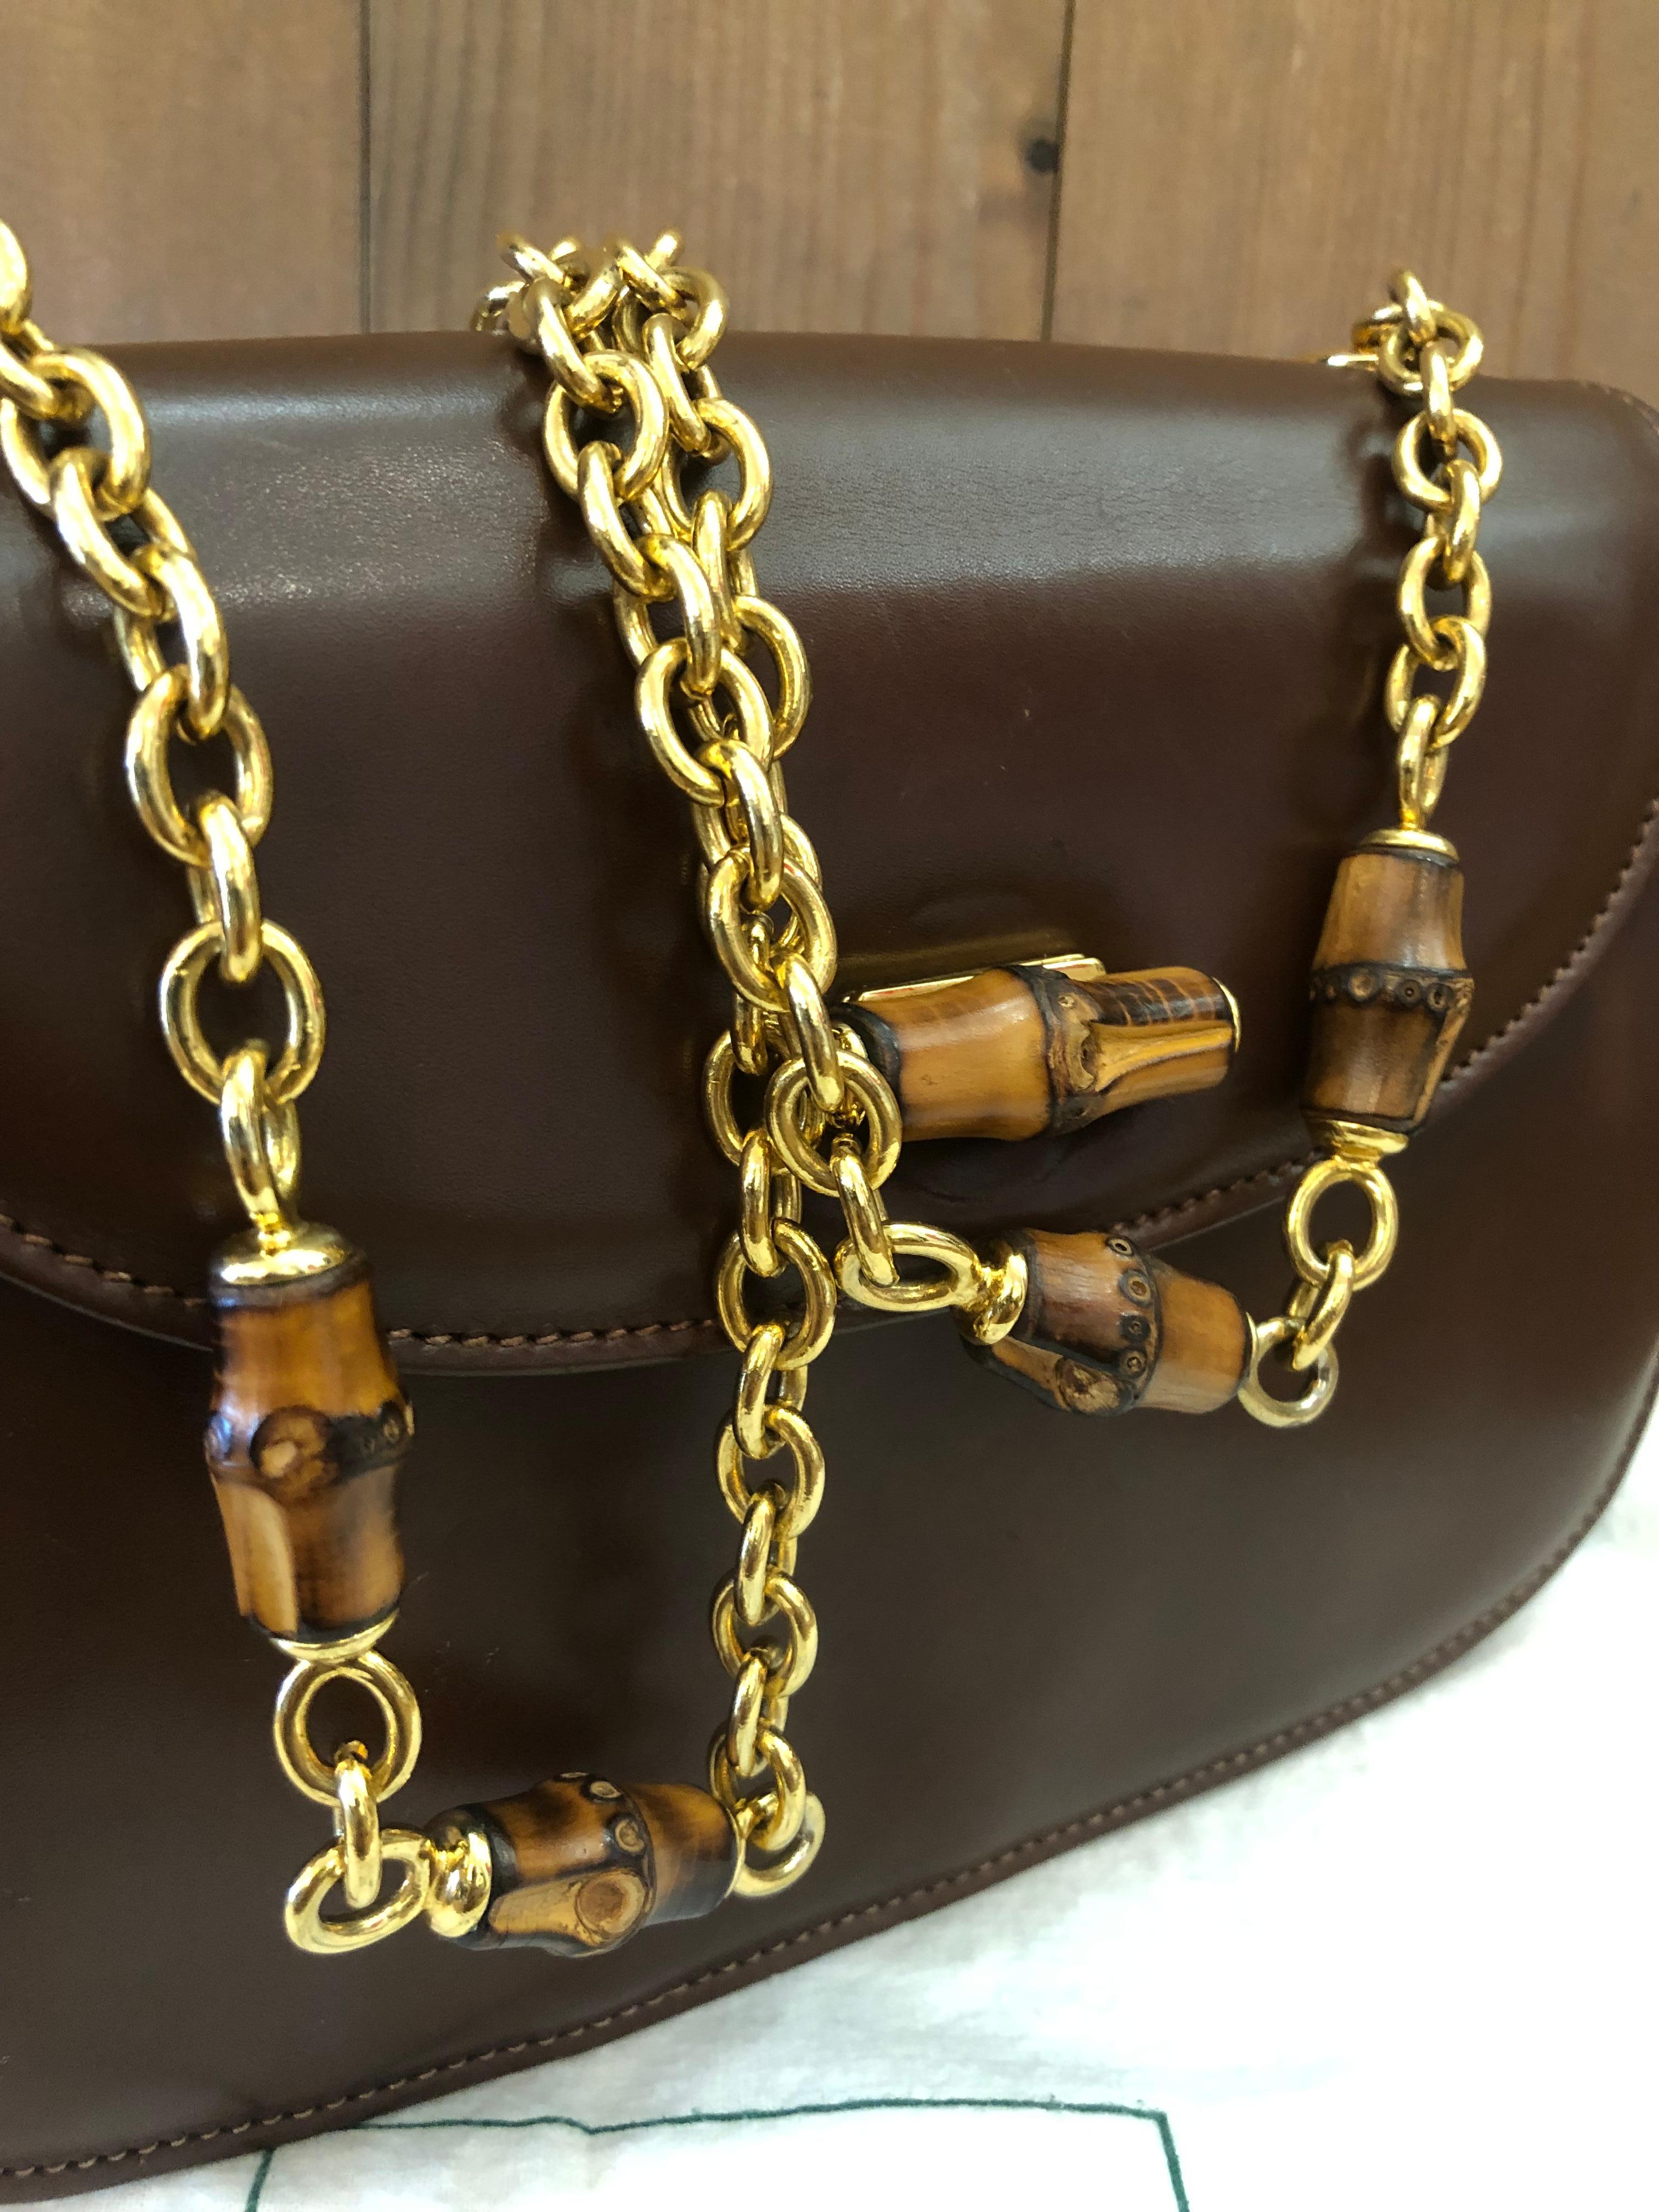 1990s Vintage GUCCI Bamboo Chain Shoulder Bag Calfskin Leather Brown For Sale 7